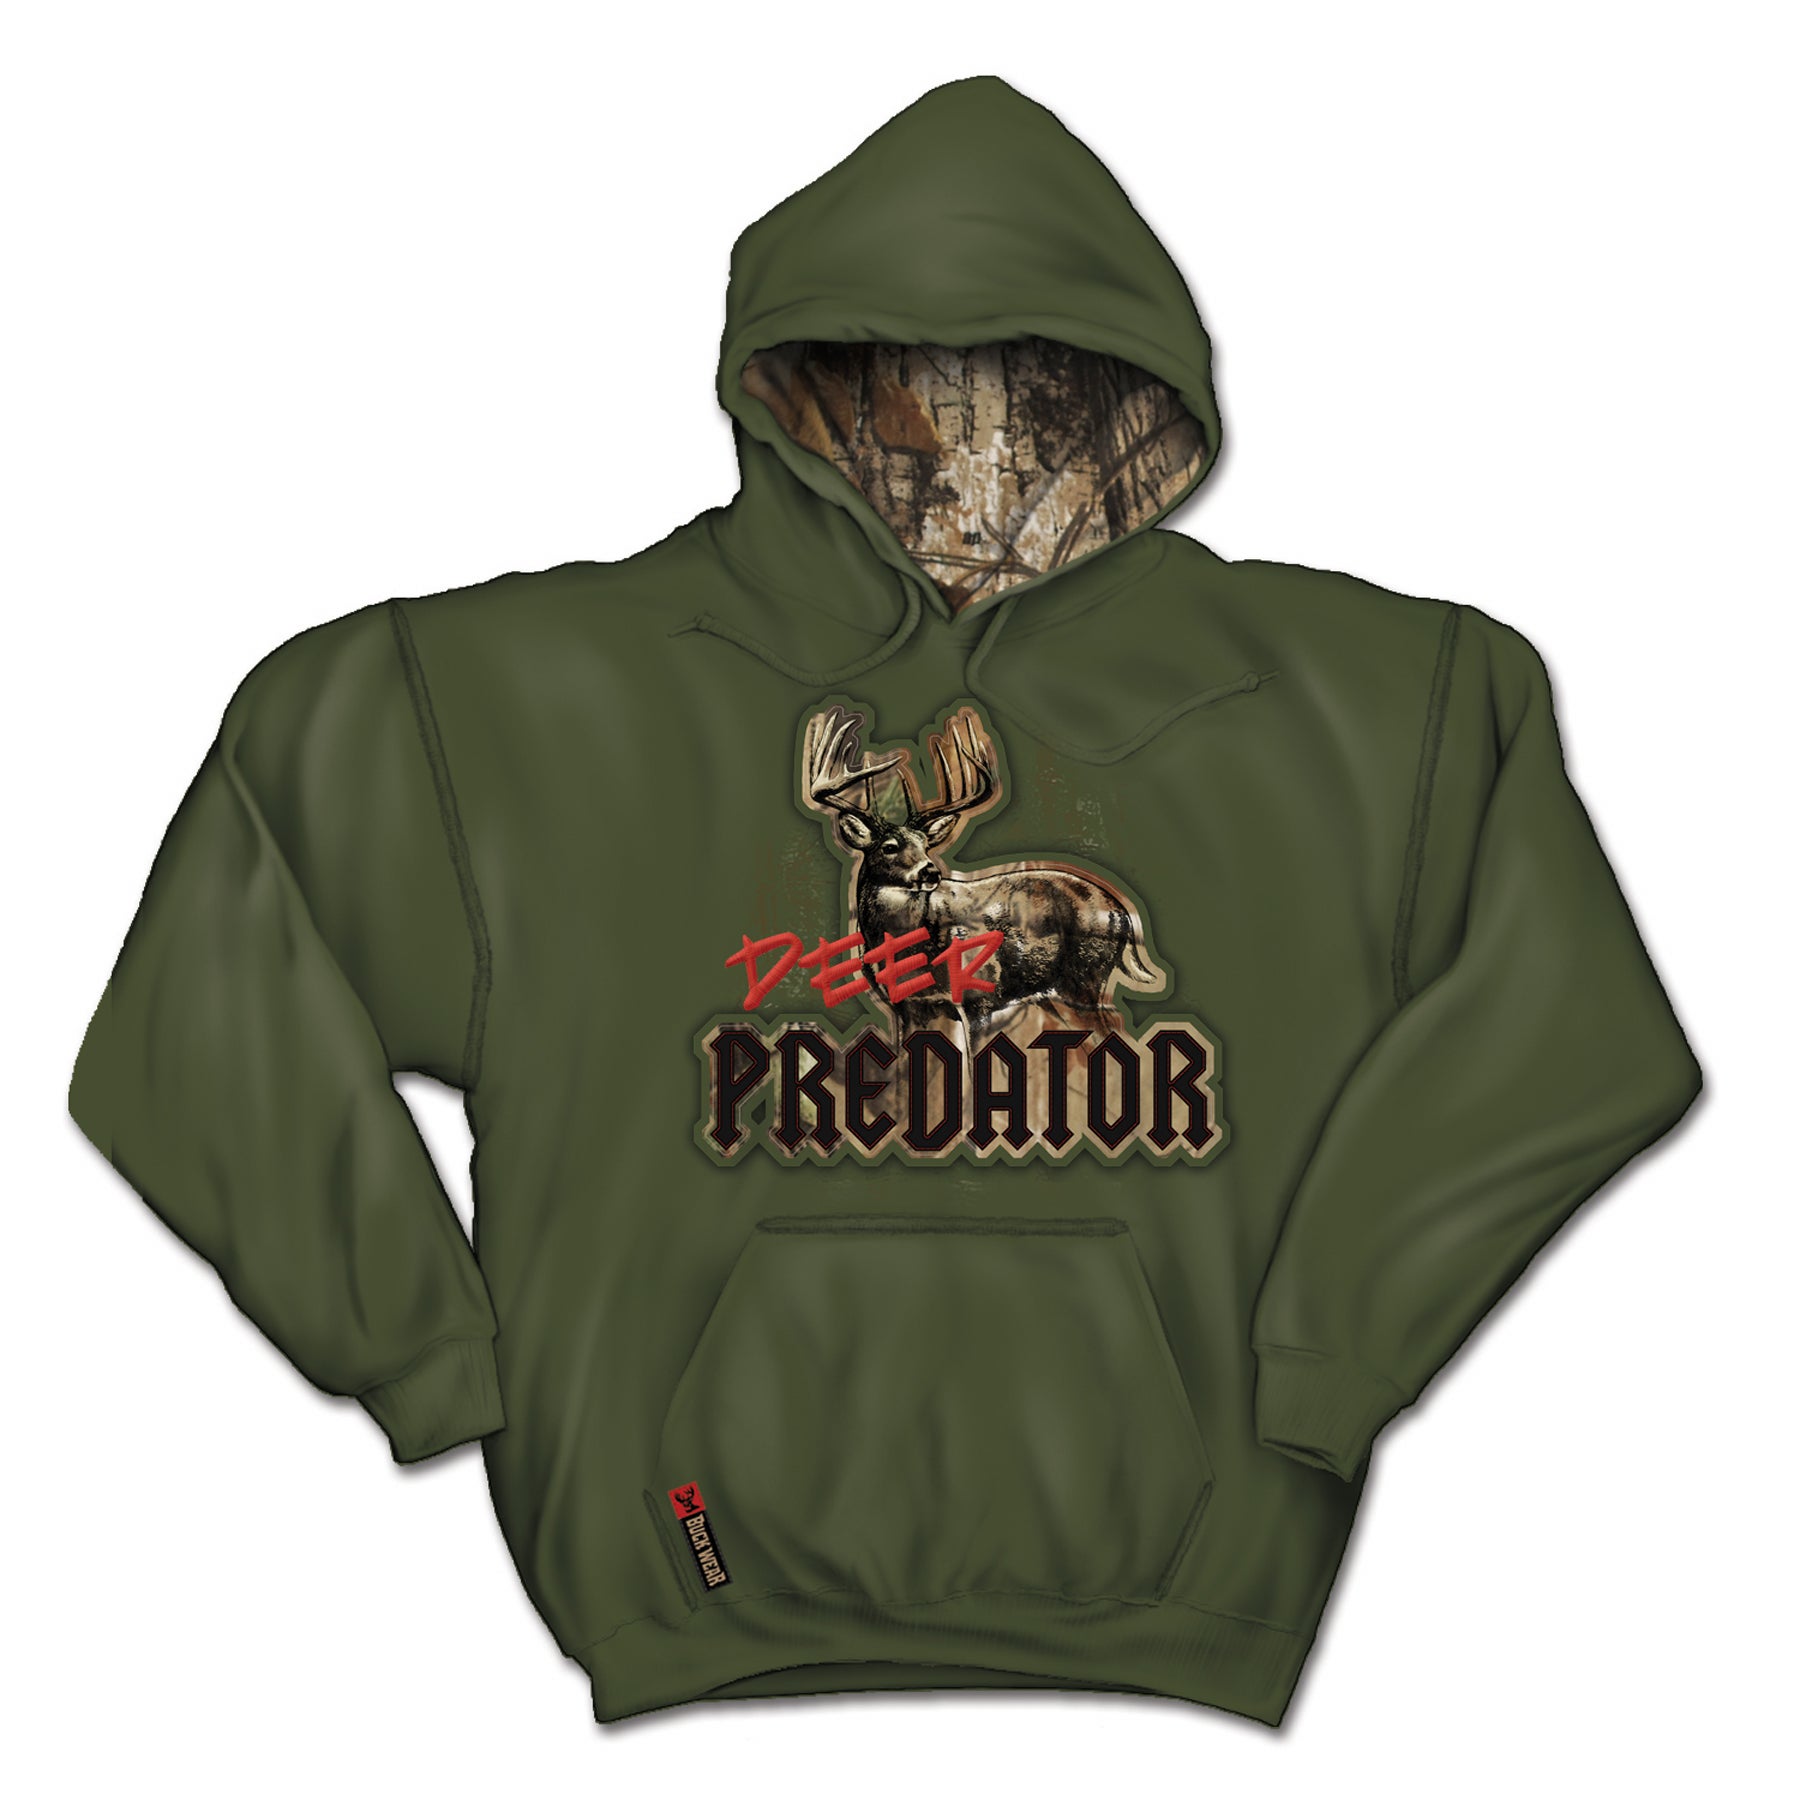 The Newest Hoodie From Buck Wear Lets It Be Known